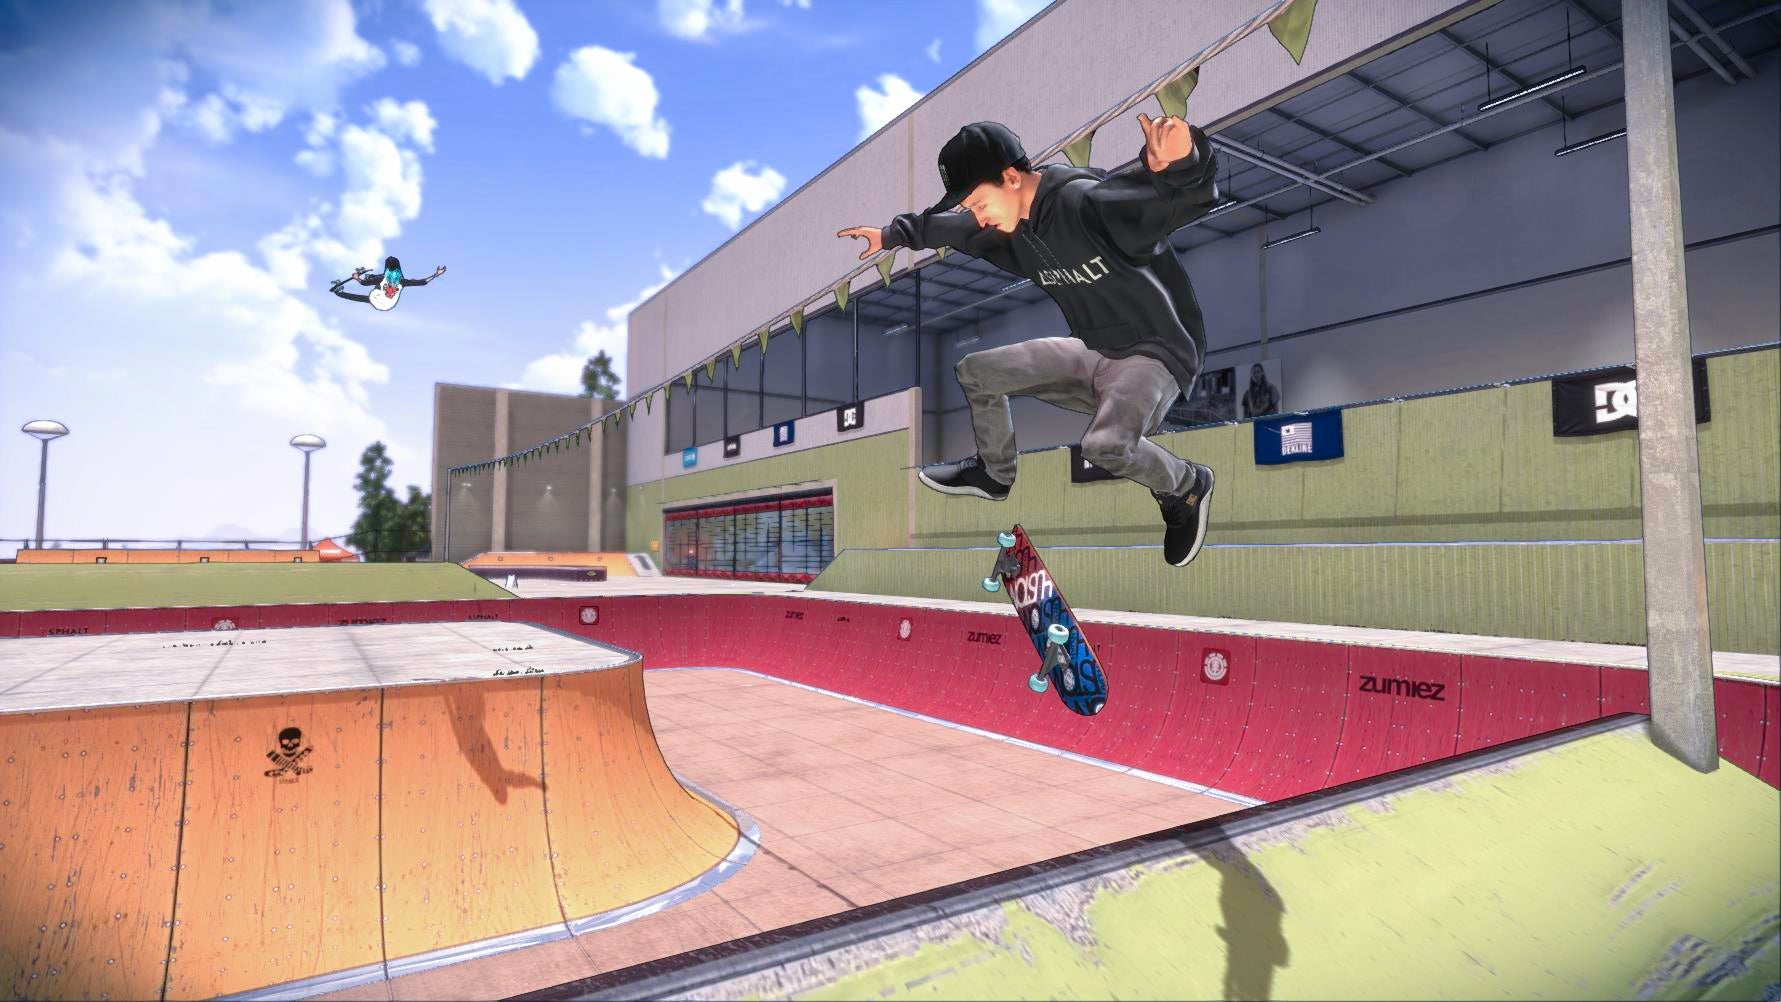 Image for Tony Hawk's Pro Skater 5 delayed on Xbox 360 and PS3